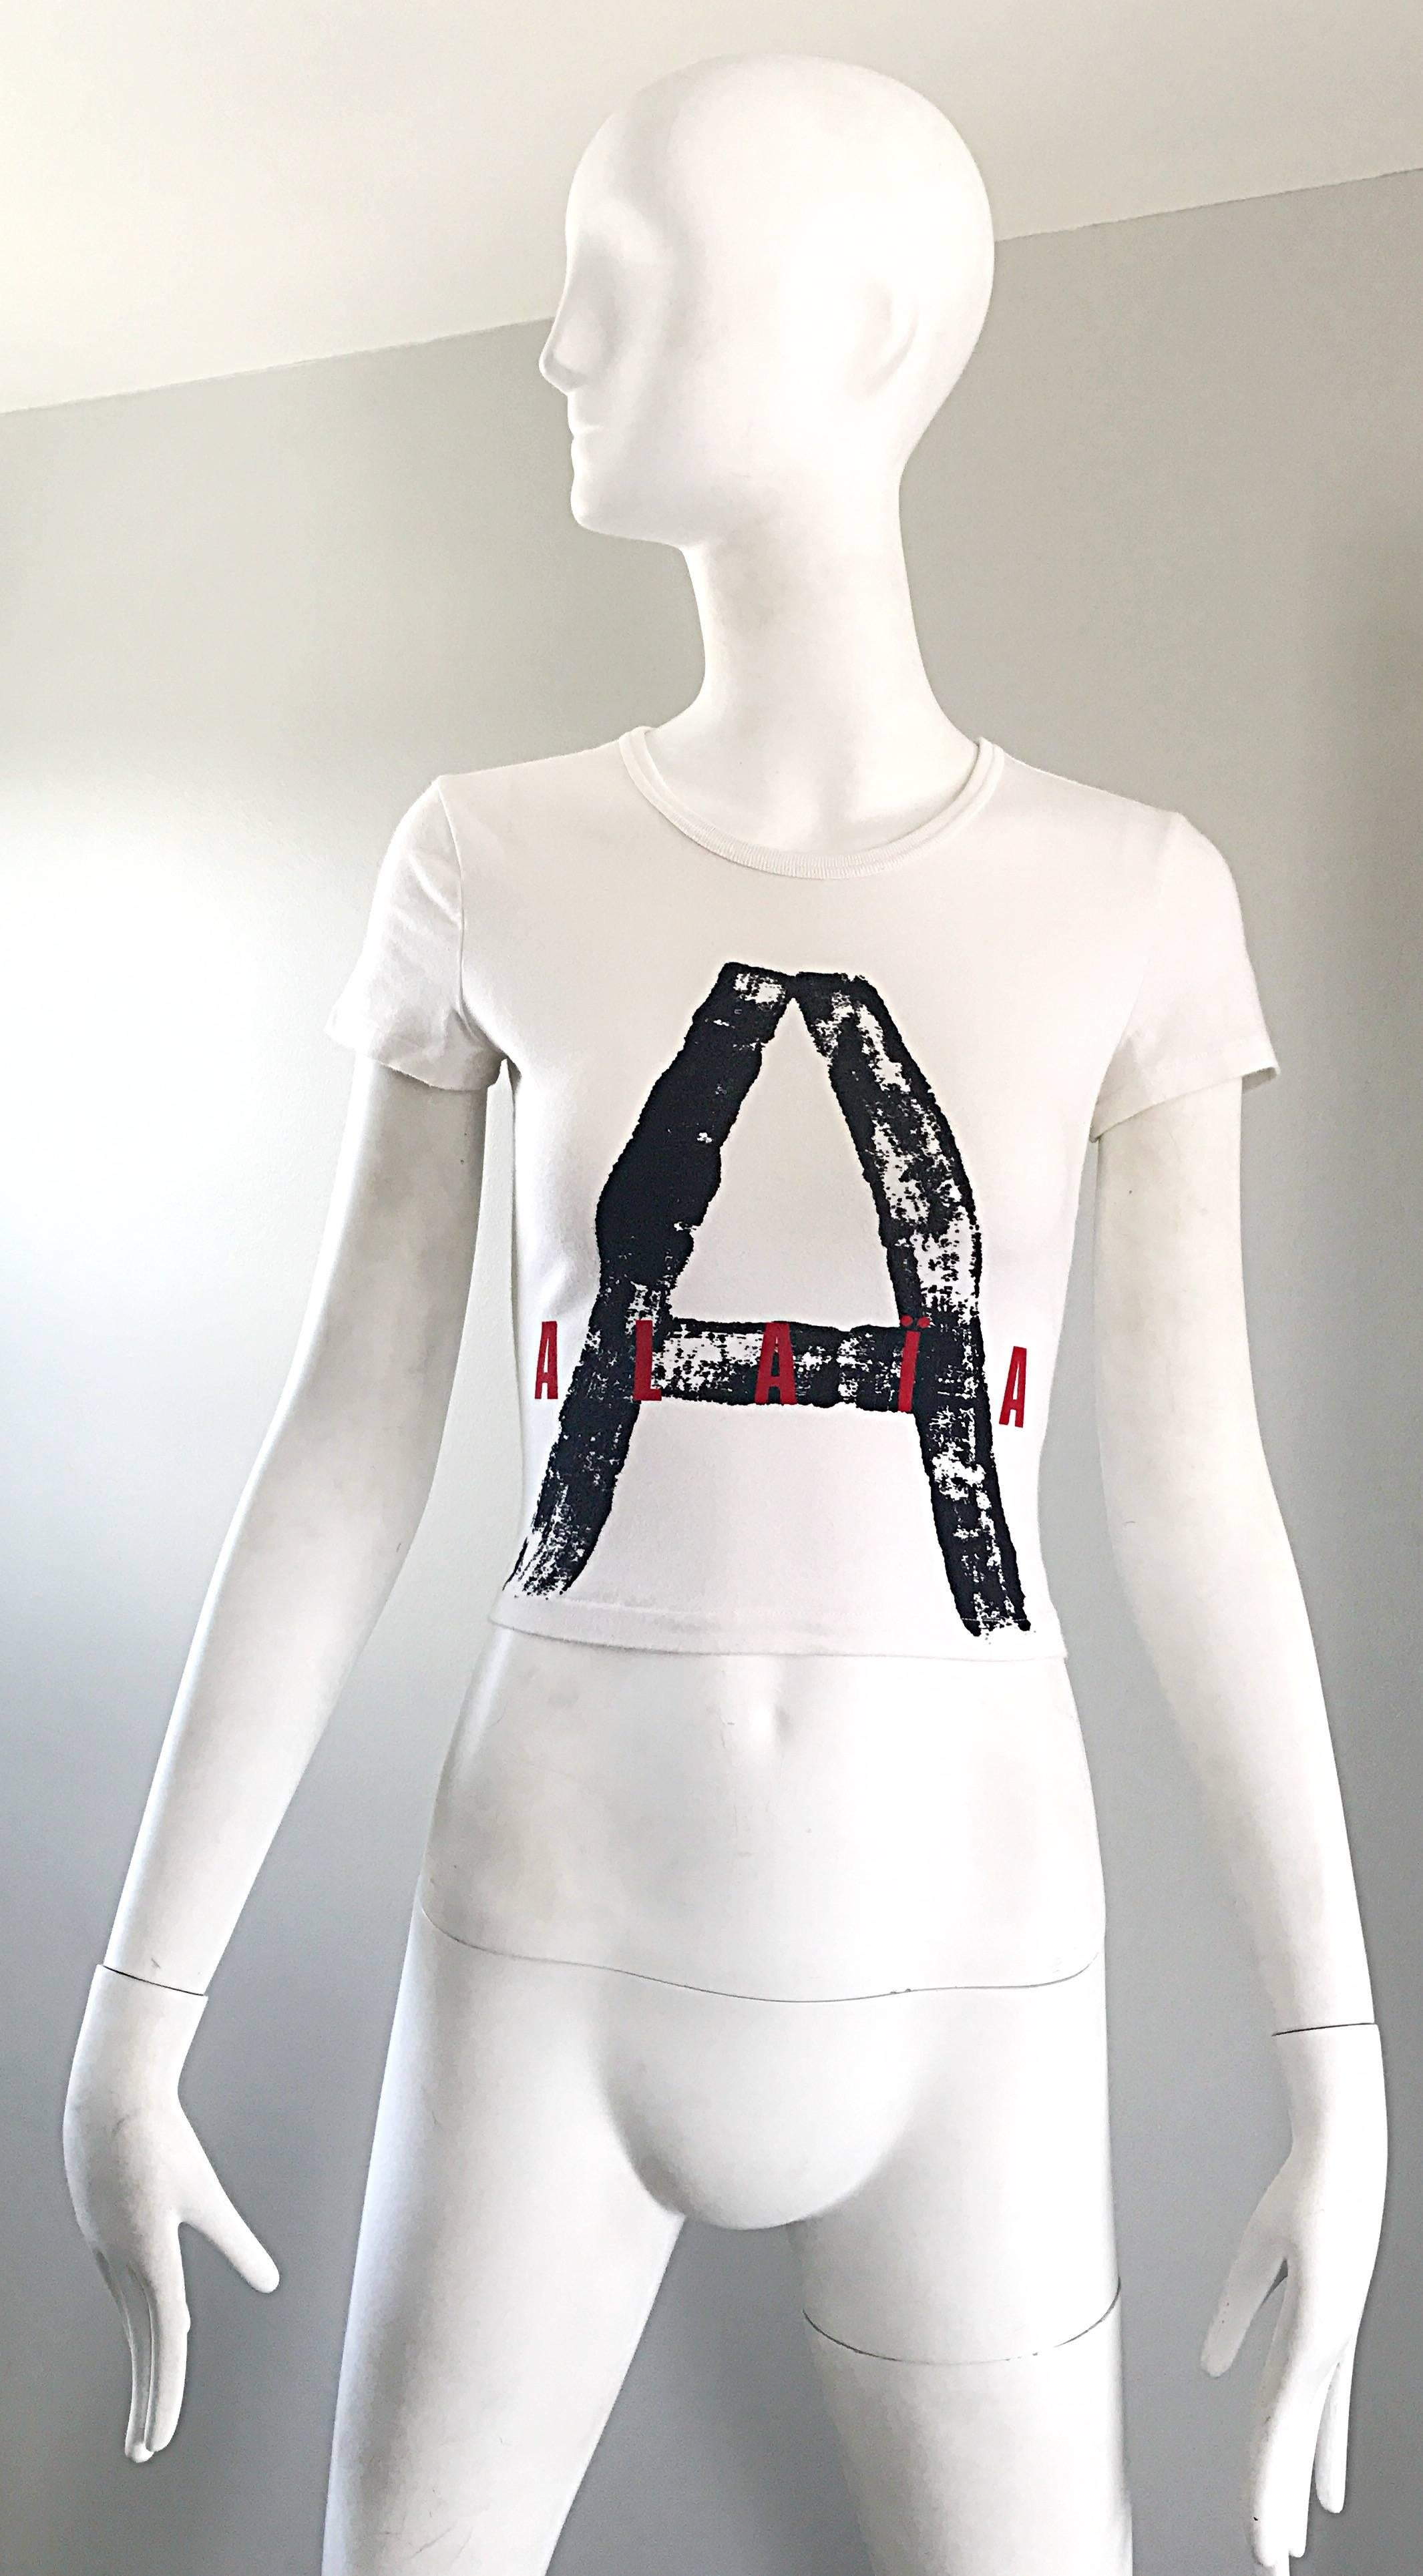 Rare and simply amazing vintage 90s ALAIA X COMME DES GARCONS black, white and red logo crop top! I have searched and searched for a piece from this collection for AGES! Truly a piece of fashion history, this rare gem features a black graffiti print